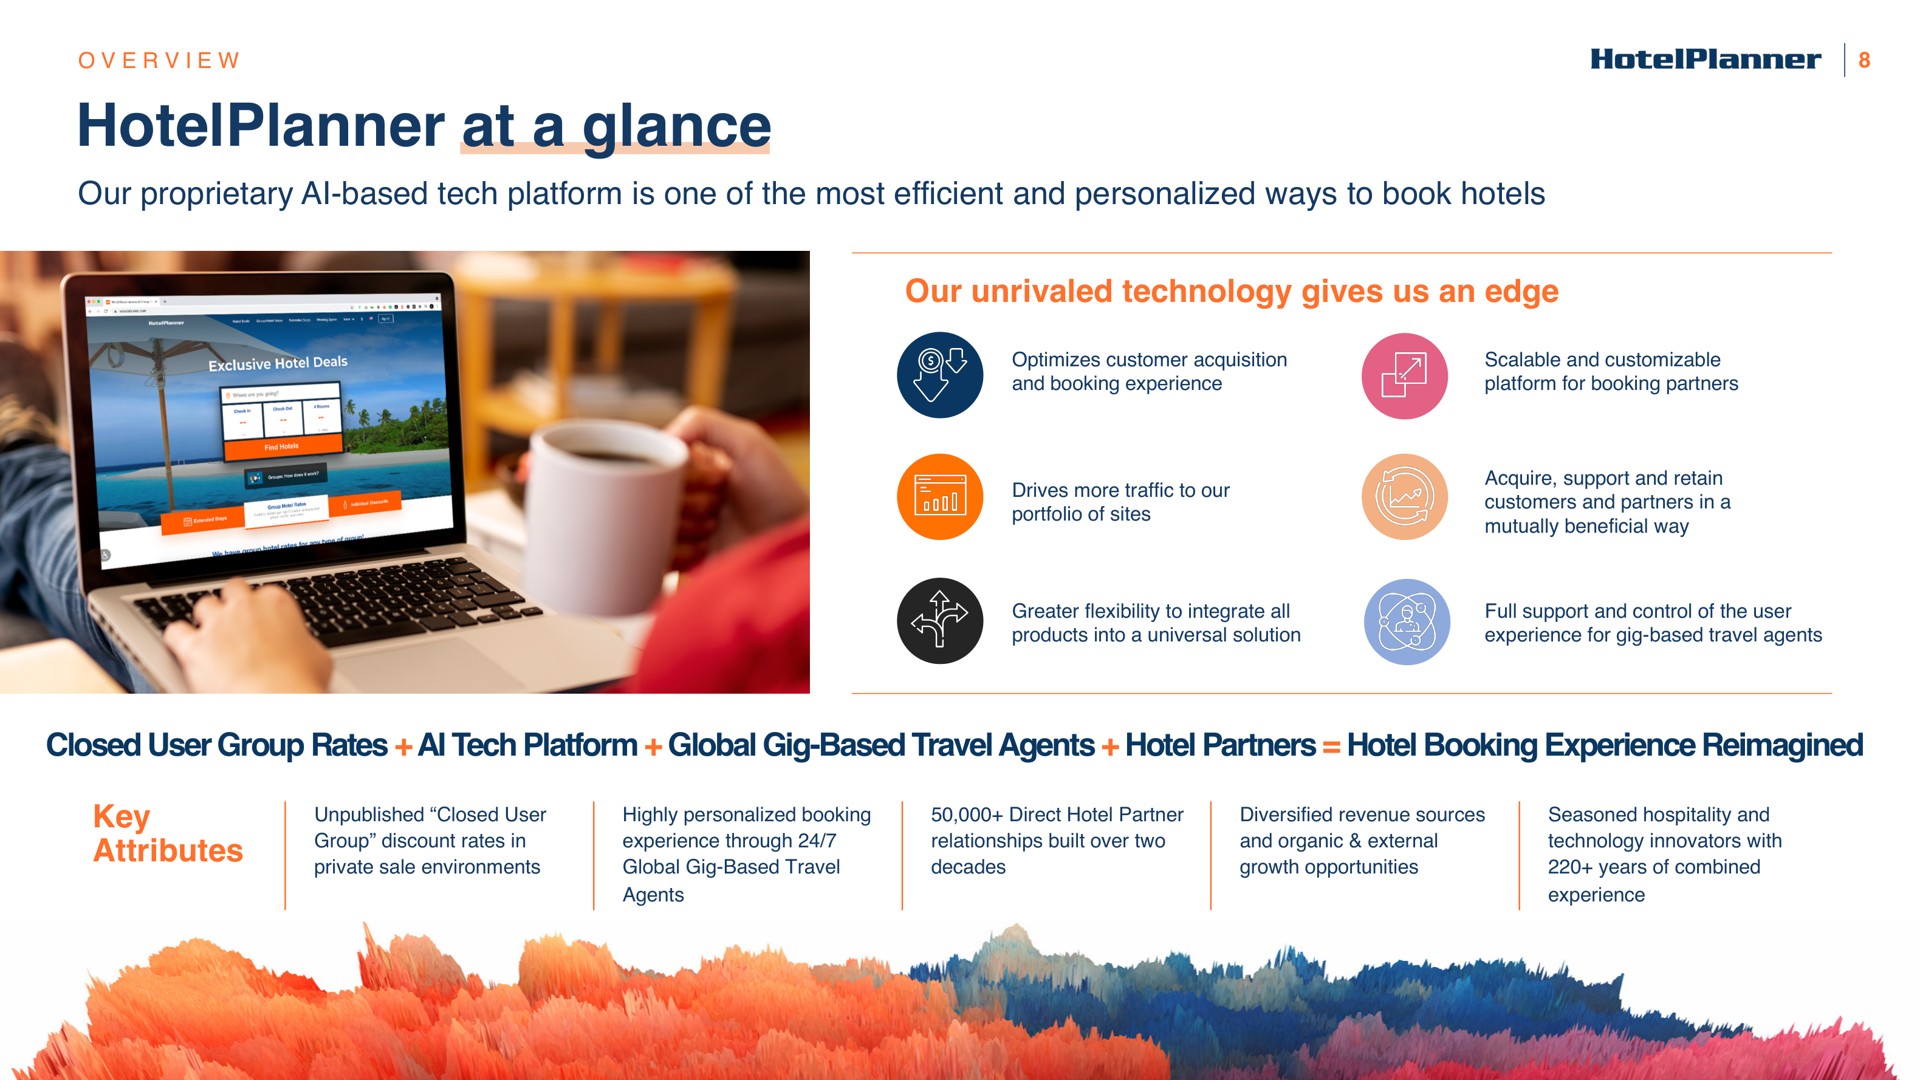 at a glance | HotelPlanner